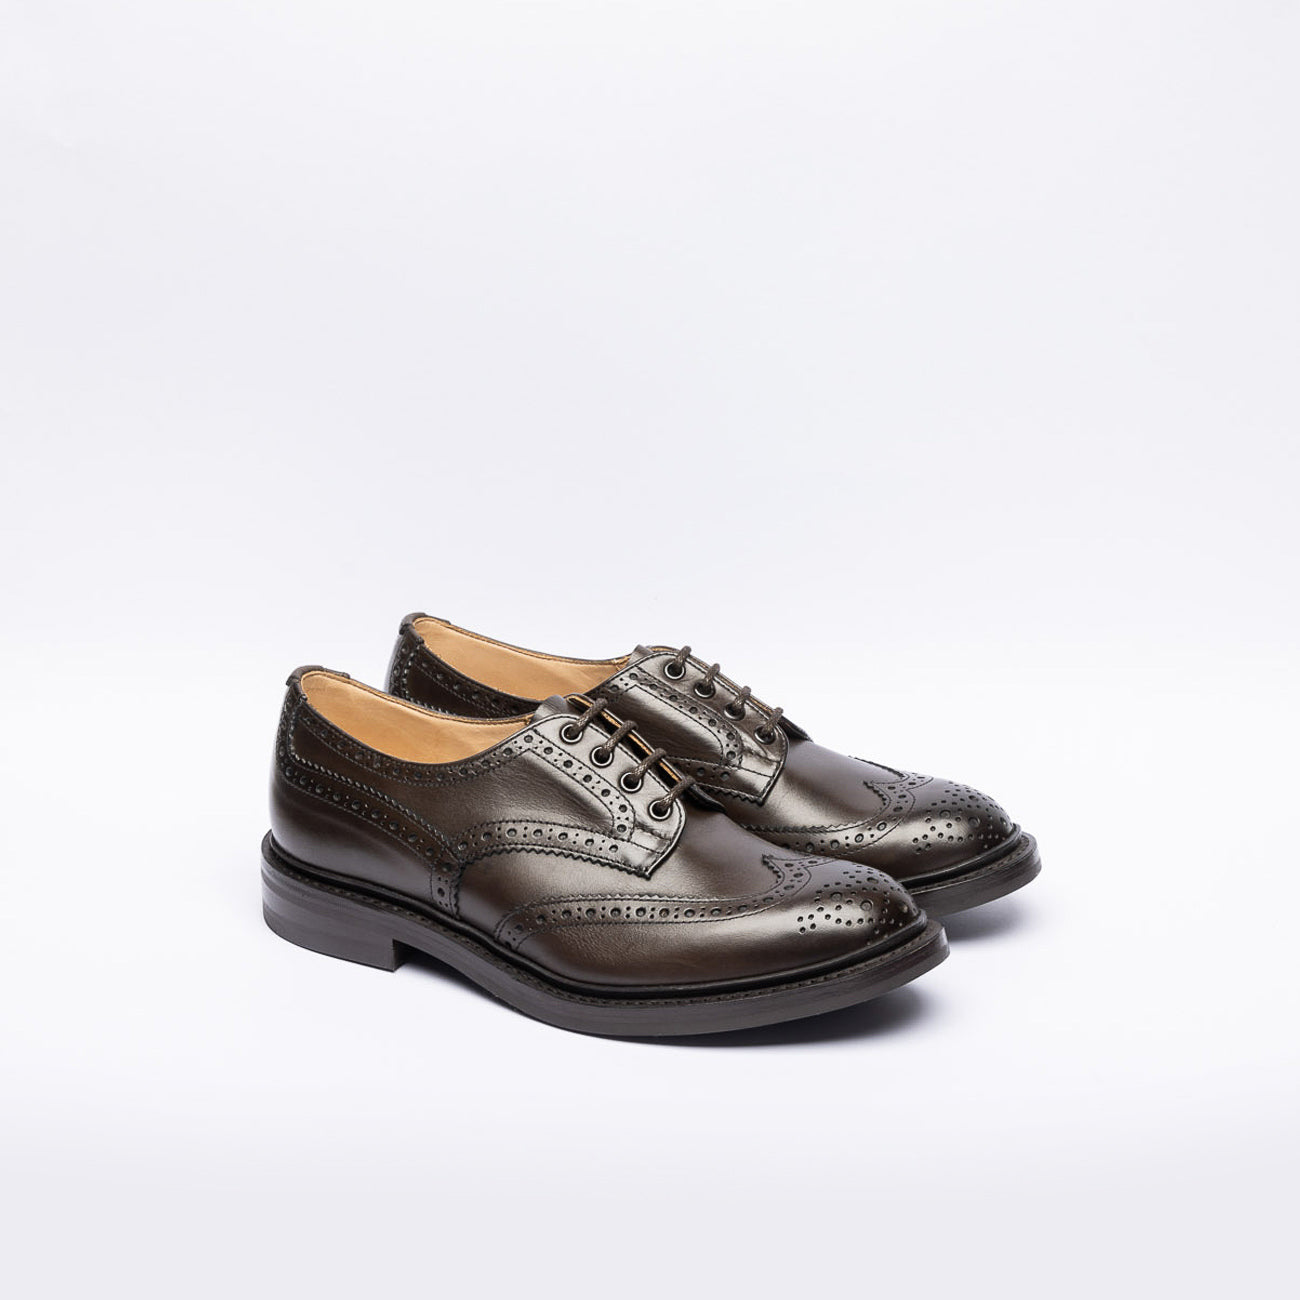 Tricker's Bourton derby lace-up in brown leather (Dainite sole)